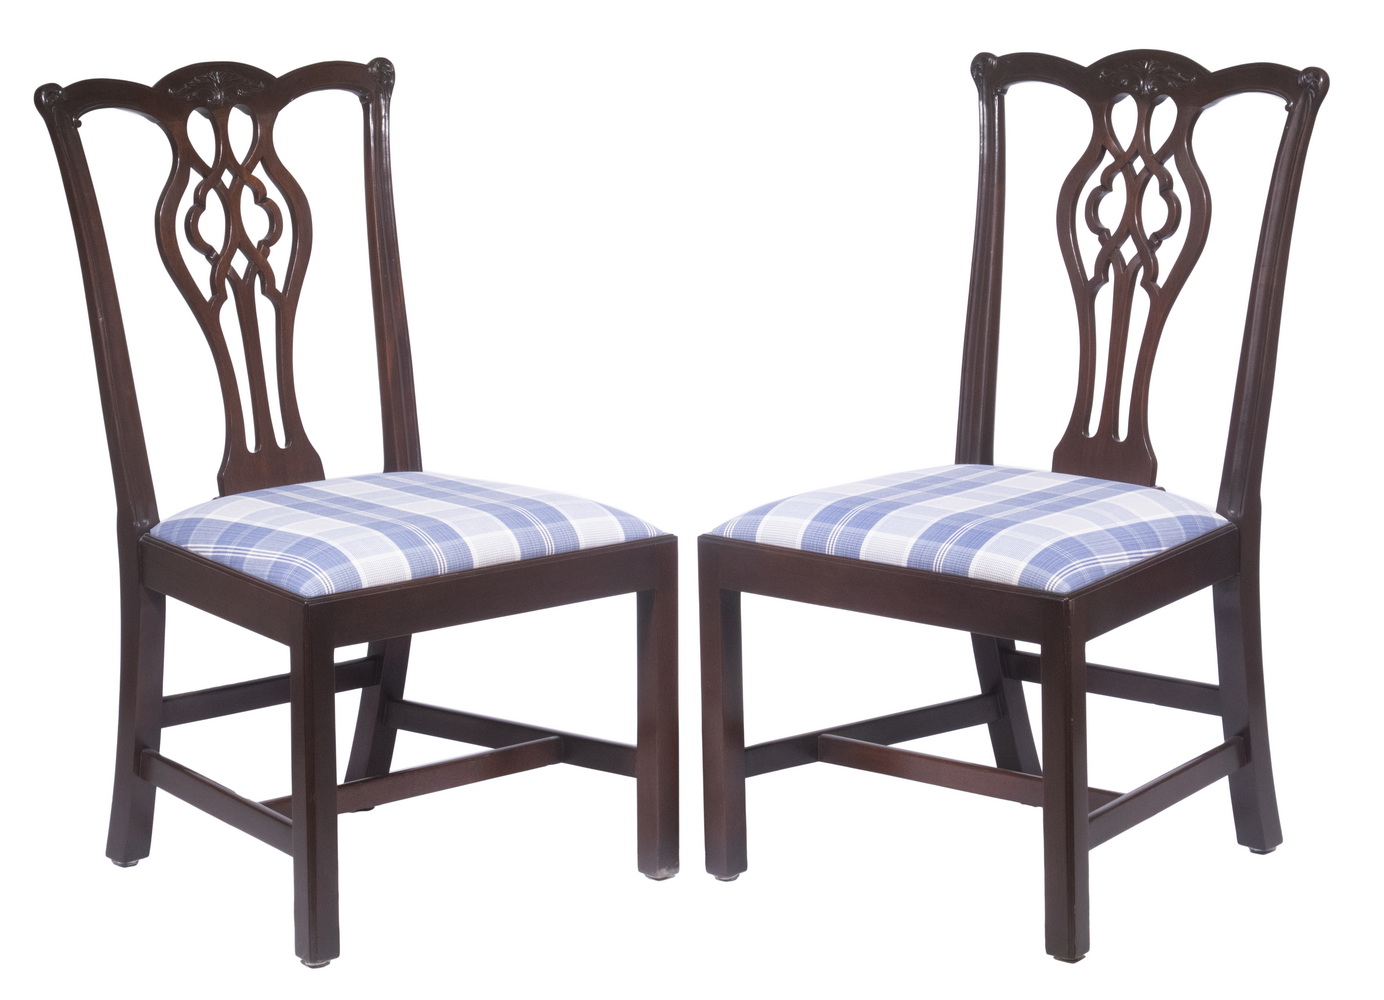 PAIR OF CHIPPENDALE STYLE SIDE